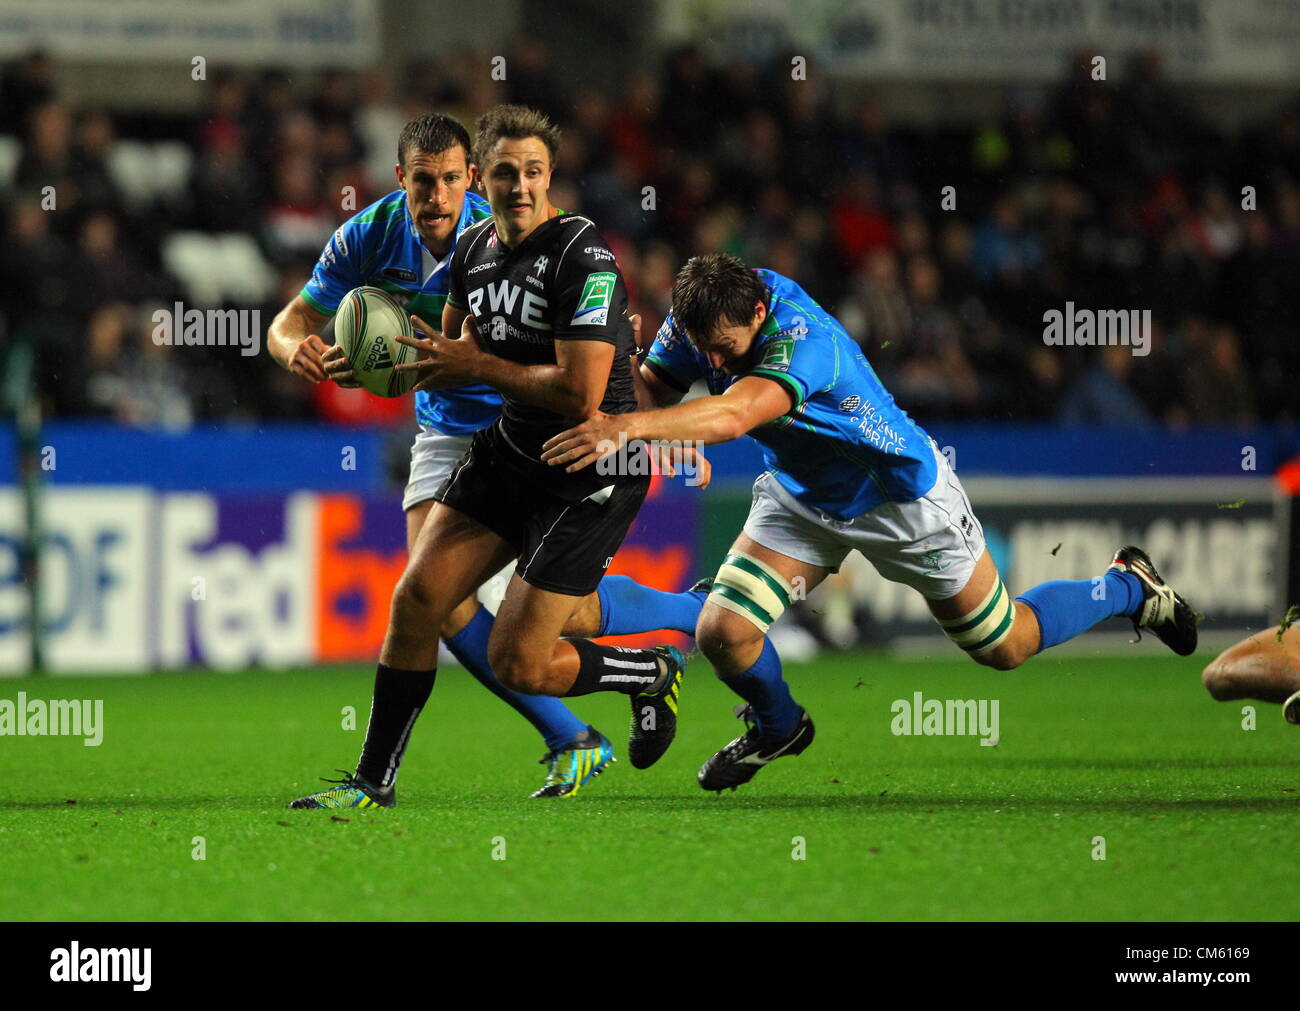 Friday 12 October 2012  Pictured L-R: Ashley Beck of the Ospreys is tackled by Paul Derbyshire of Benetton Treviso.   Re: Heineken Cup, Ospreys v Benetton Treviso at the Liberty Stadium, SWansea, south Wales. Stock Photo